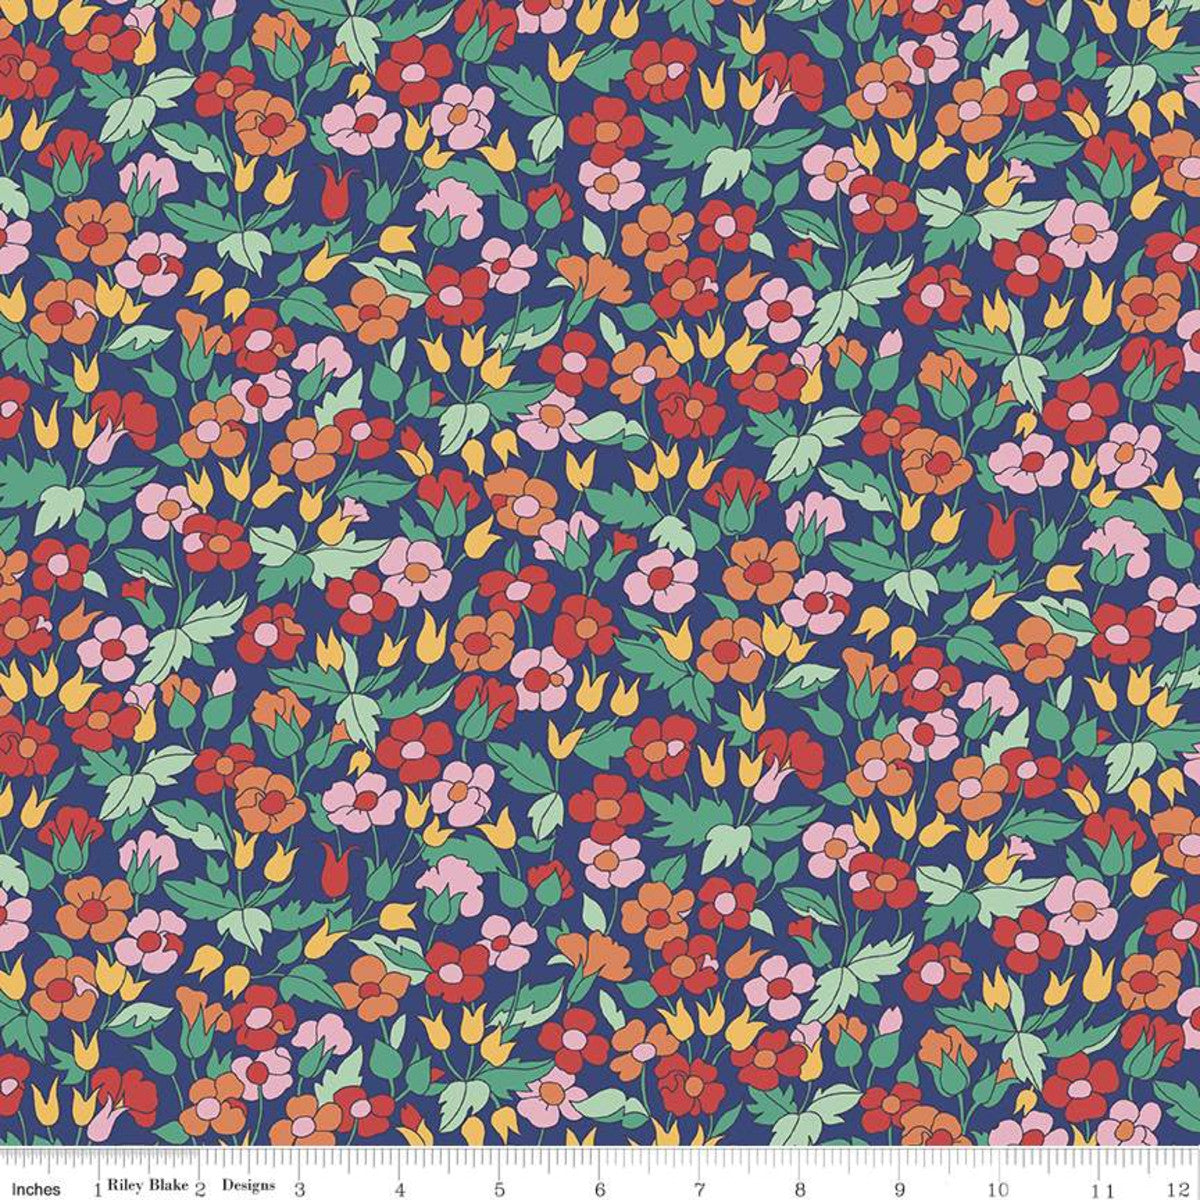 Carnaby Picadilly Poppy F - Bohemian Brights - Liberty of London - Riley Blake Designs - yard fabric - quilting cotton